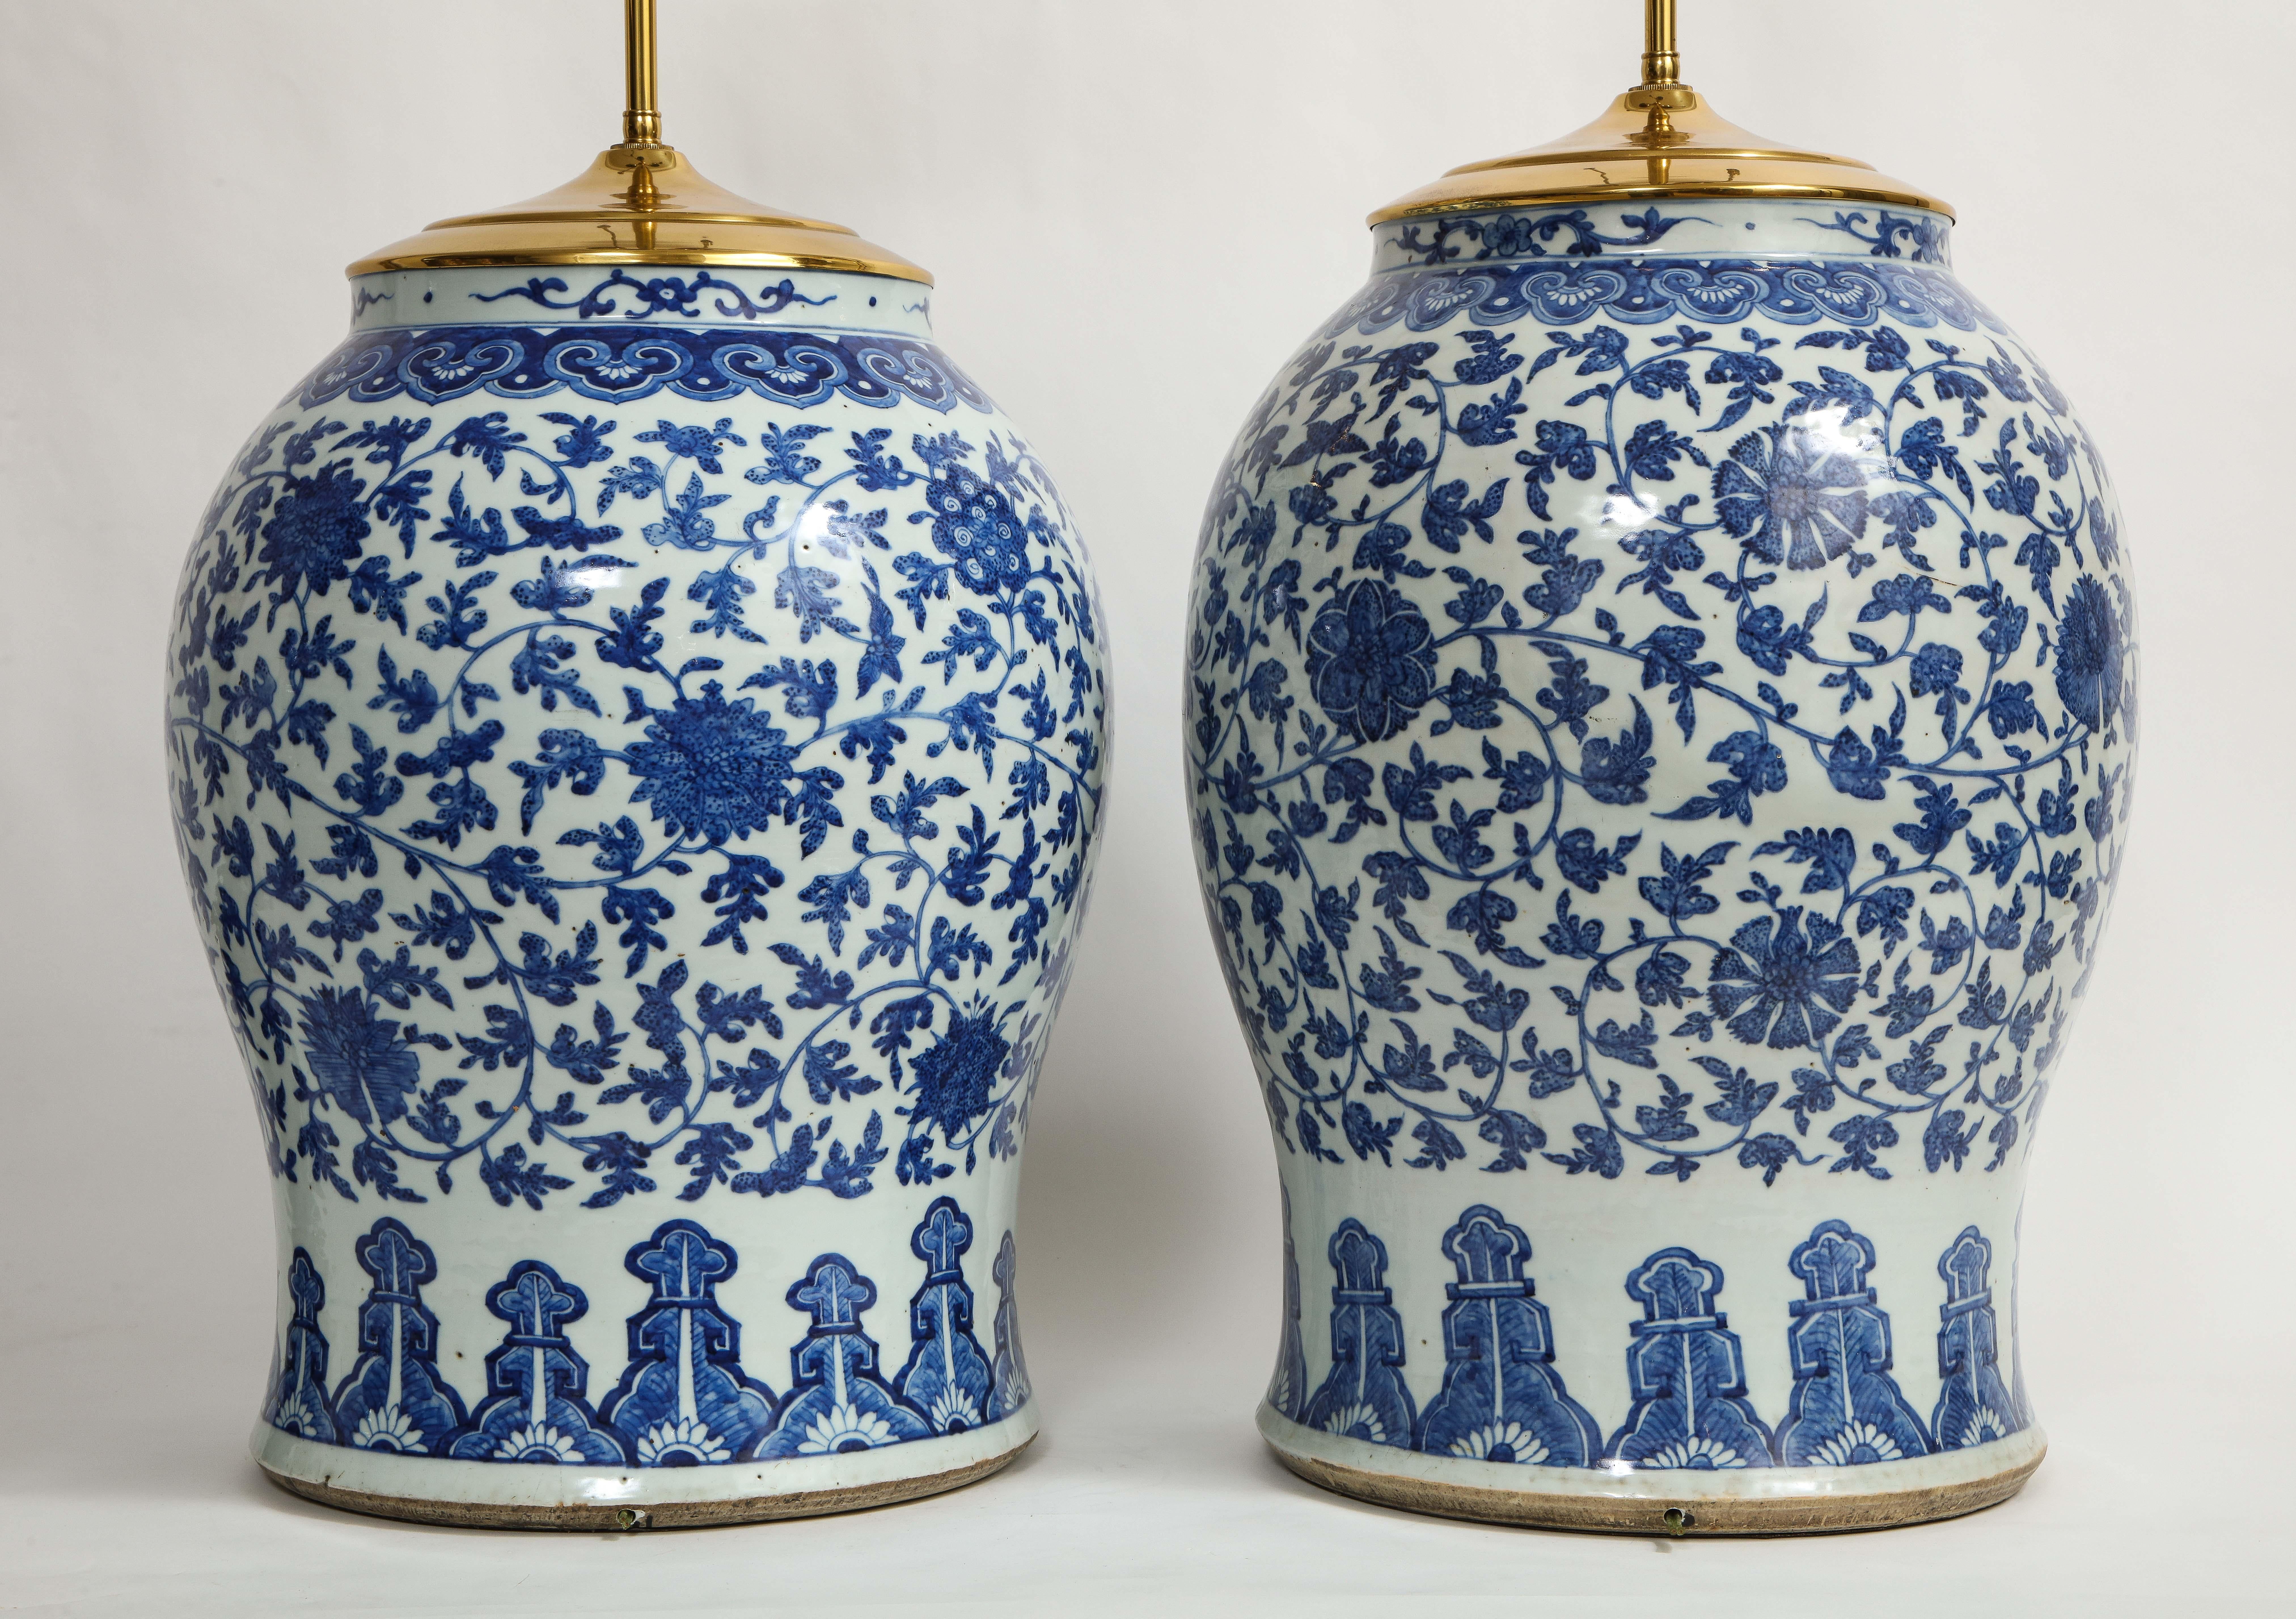 Hand-Painted Pair of 19th Century Qing Dynasty Chinese Blue and White Vases Turned to Lamps For Sale